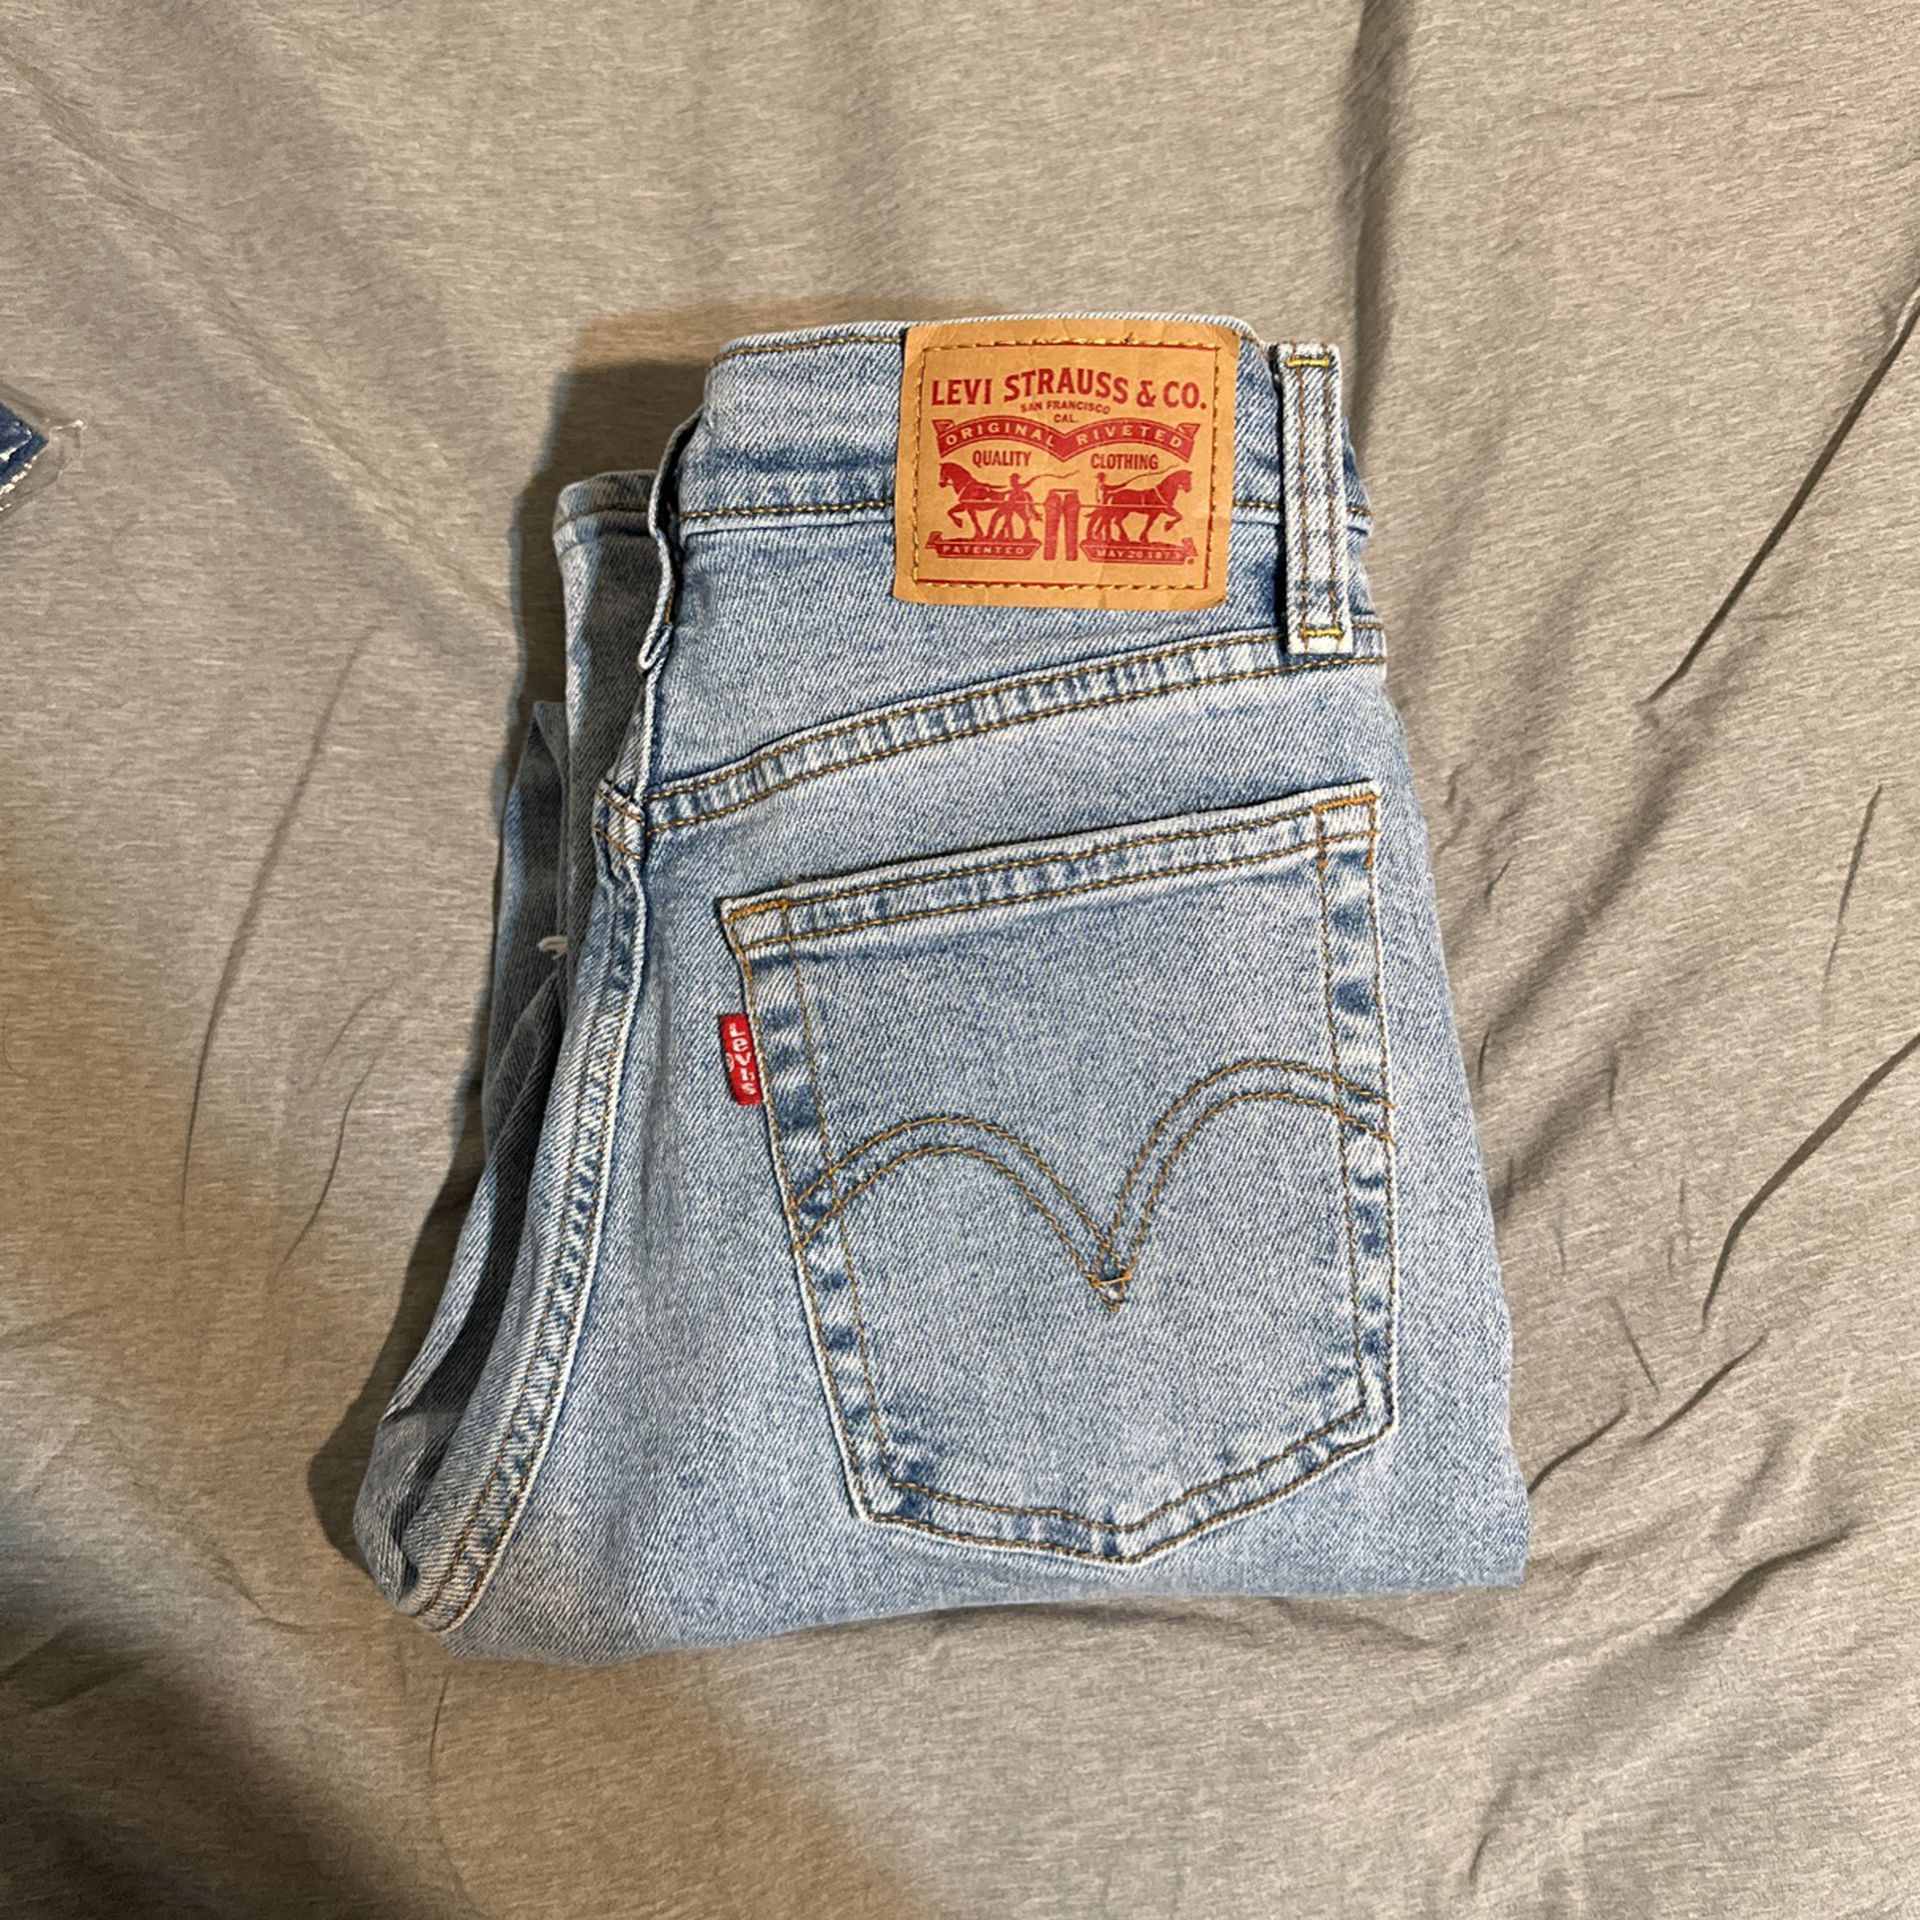 Gently Used Women’s Levis 